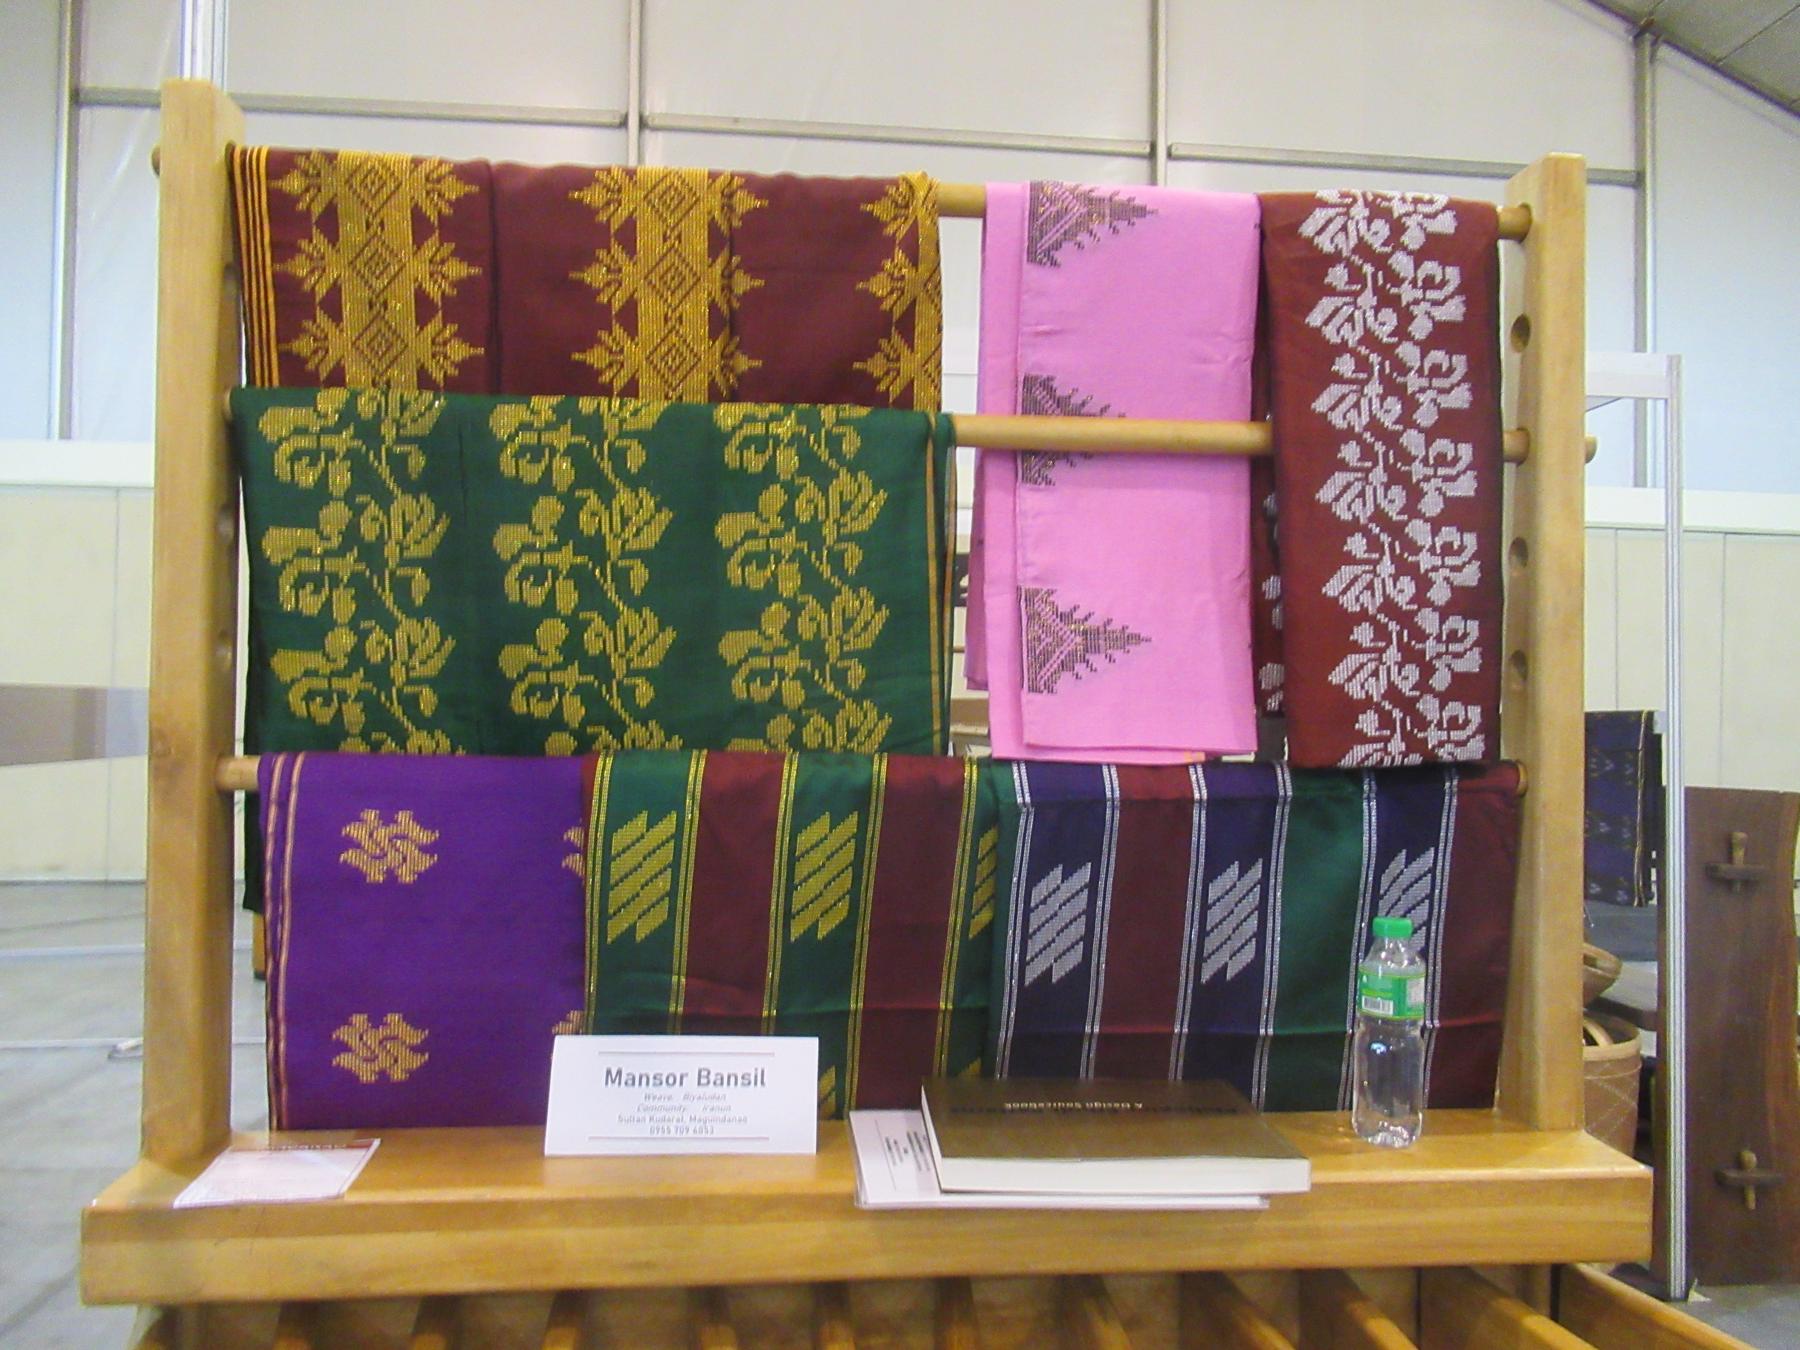 'Likha' (Exhibit) 08 - a wooden display with a variety of different colored towels